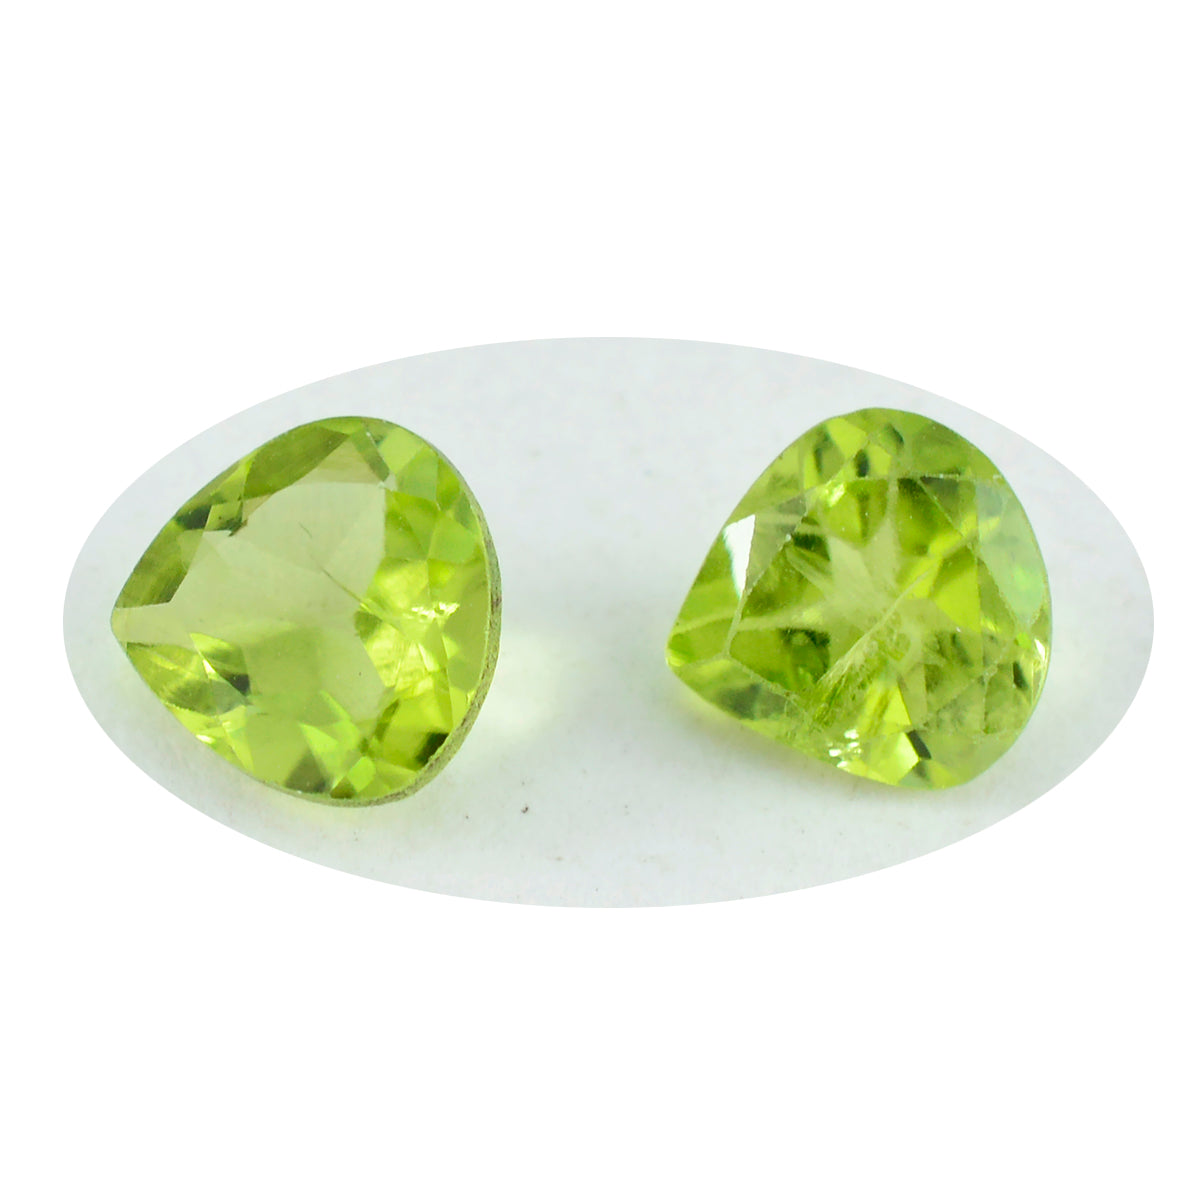 Riyogems 1PC Real Green Peridot Faceted 8x8 mm Heart Shape A Quality Loose Gems